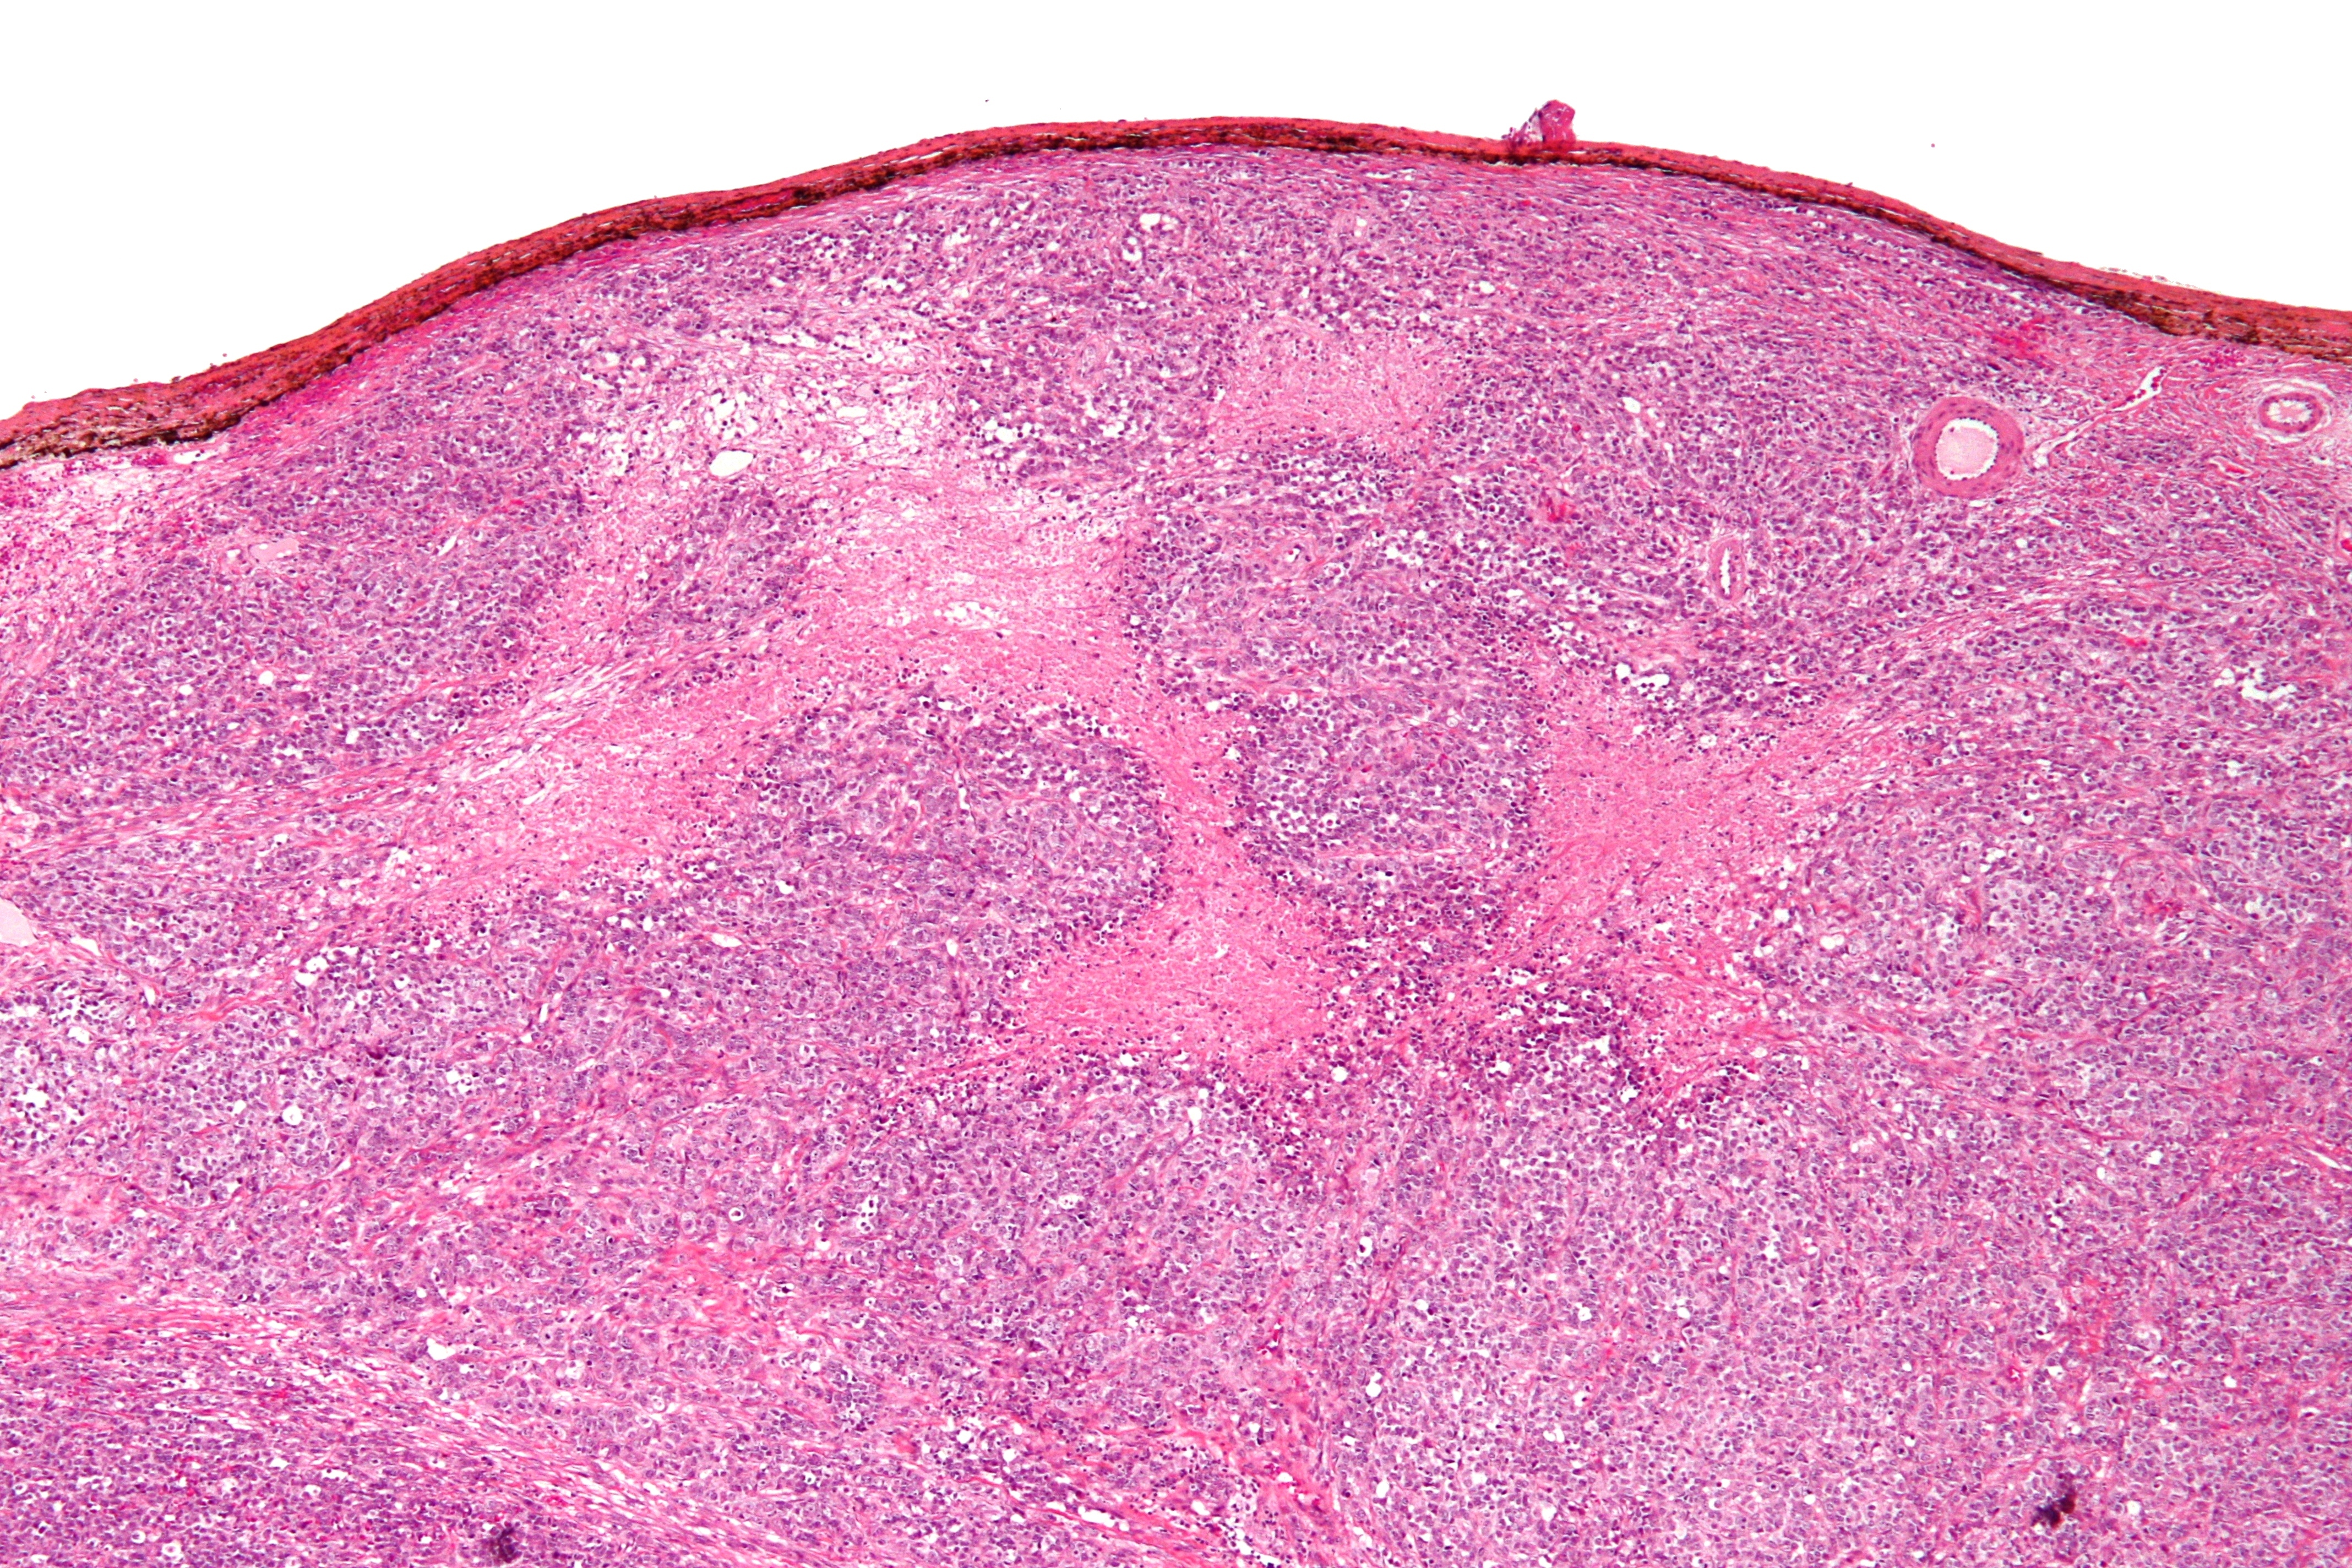 Small_cell_carcinoma_of_the_ovary_hypercalcemic_type_-_low_mag